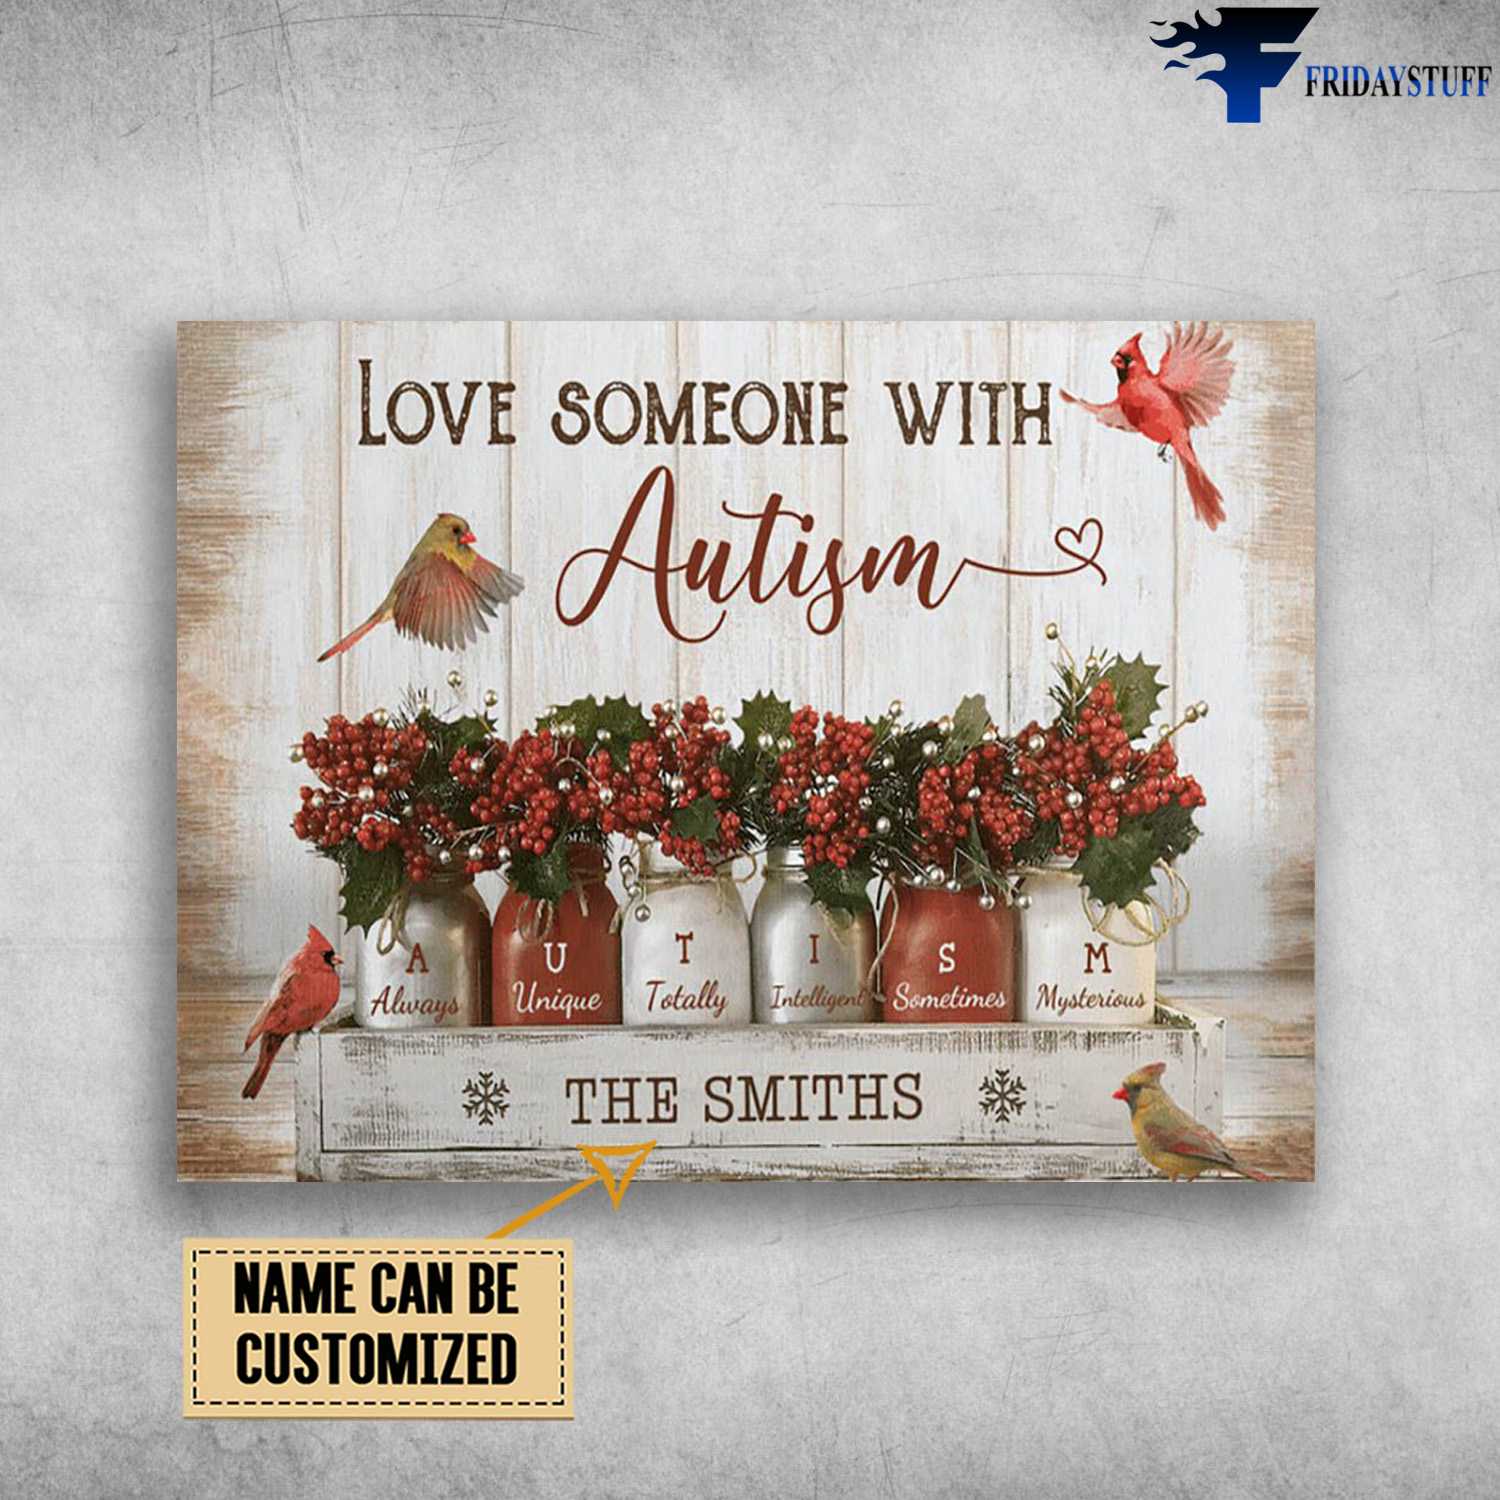 Cardinal Bird, Family Poster, Love Someone With Autism, Always, Unique, Totally, Intelligent, Sometimes, Mysterious